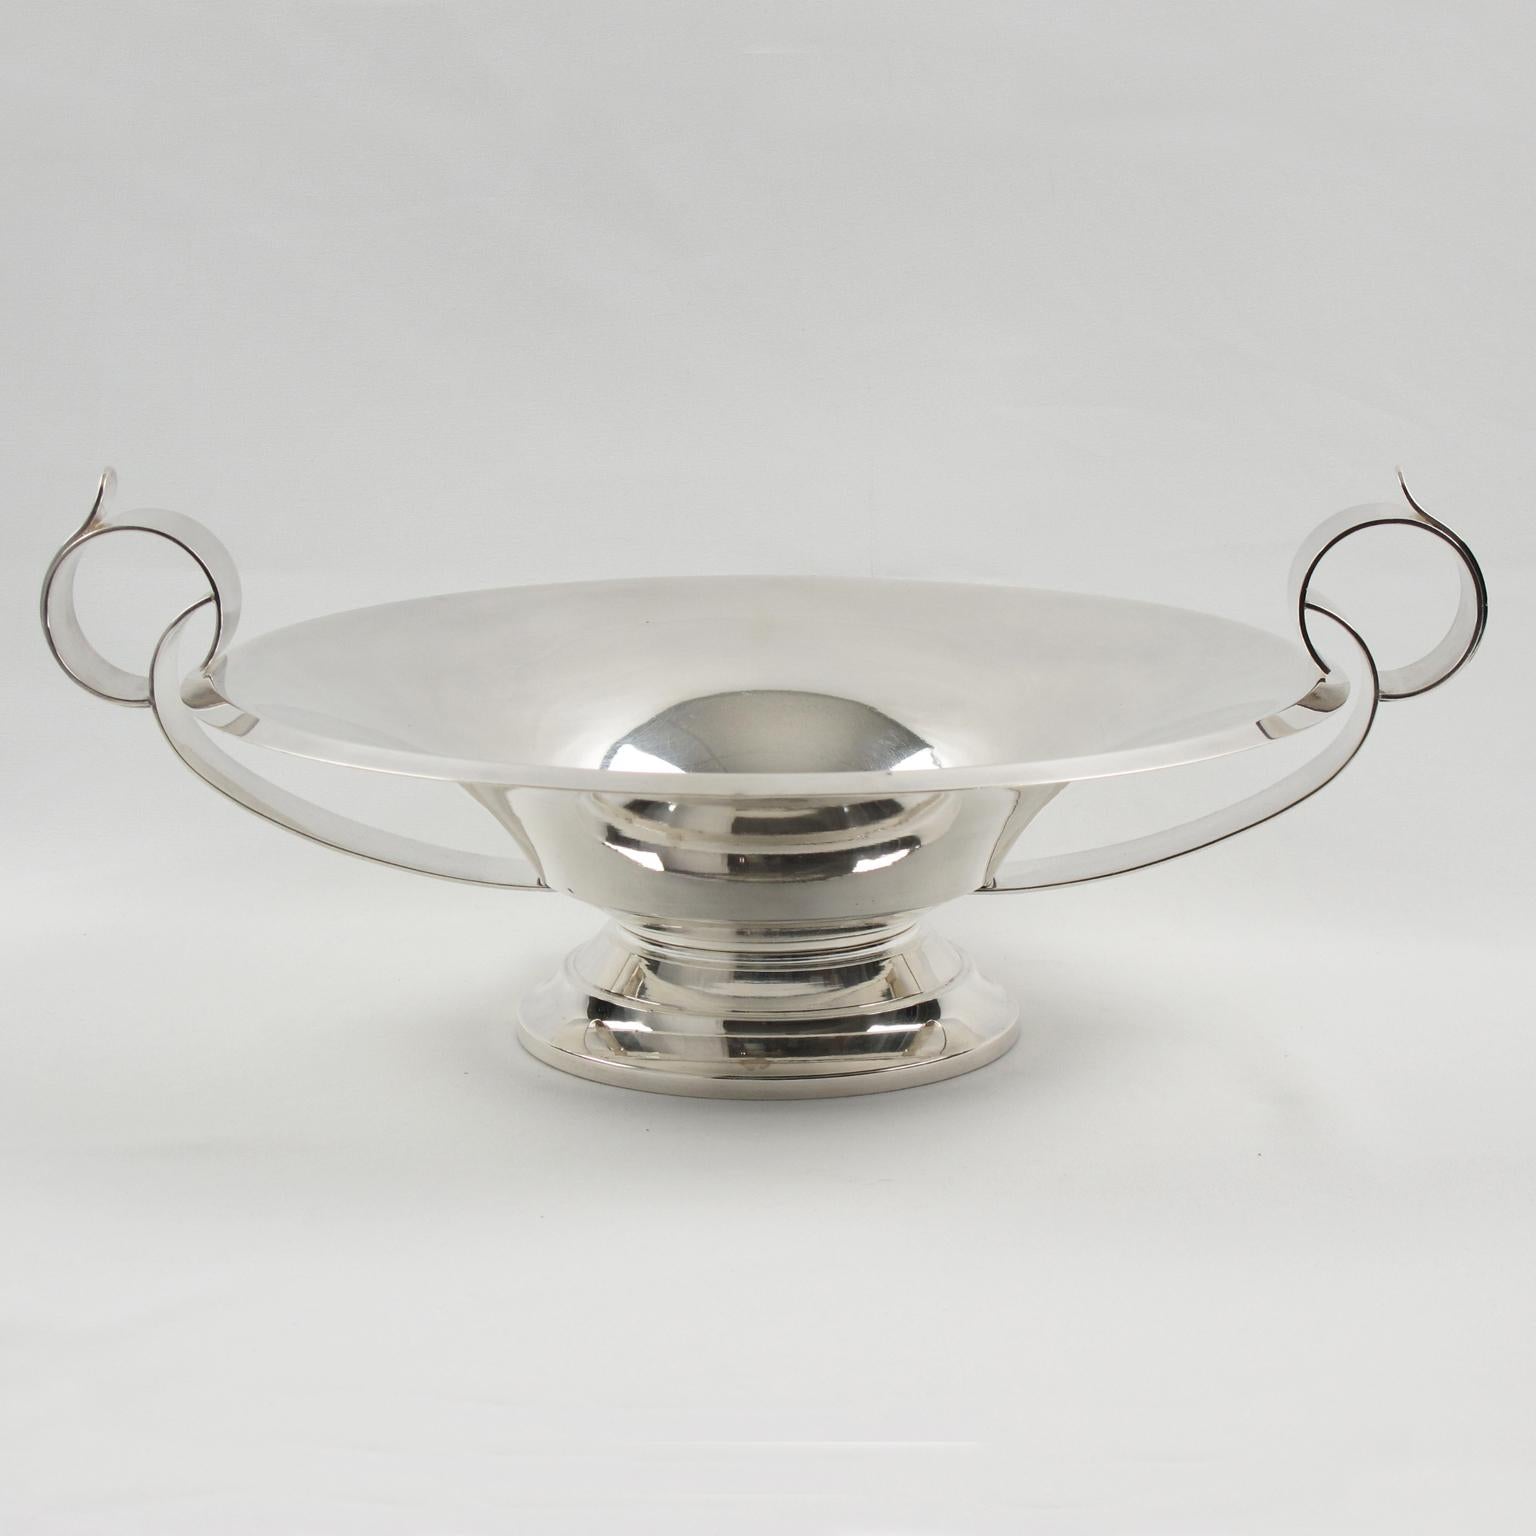 French Art Deco polished silver plate pedestal bowl, great centerpiece, or serving bowl. Modernist design with a round stepped bottom, a funnel-shaped dish with a flat bottom compliment with large loop handles. Signed on edge with legal silversmith